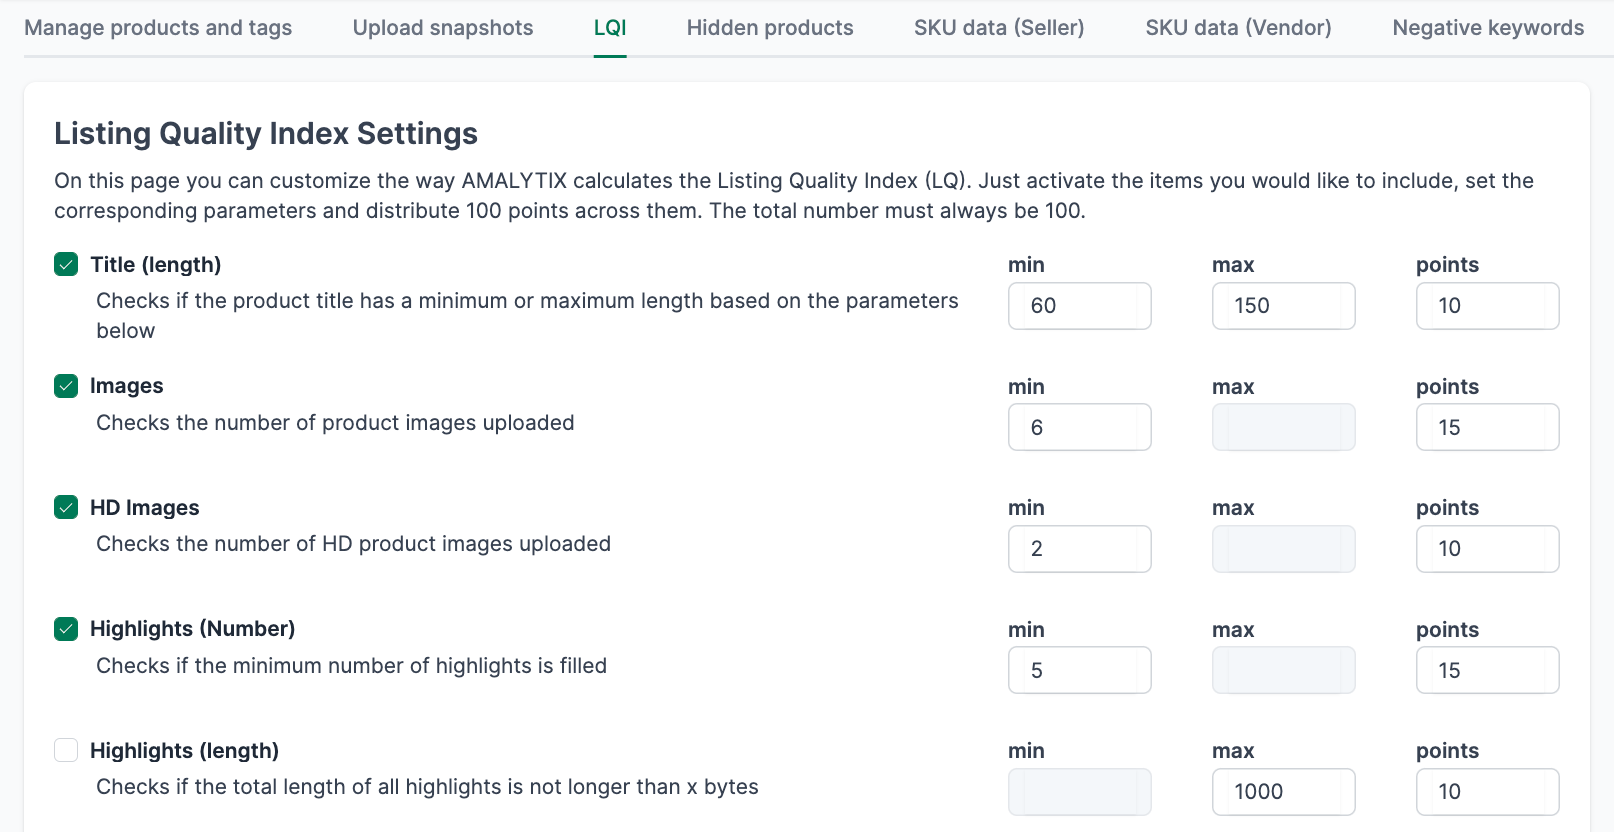 Overview of the listing quality index settings in AMALYTIX